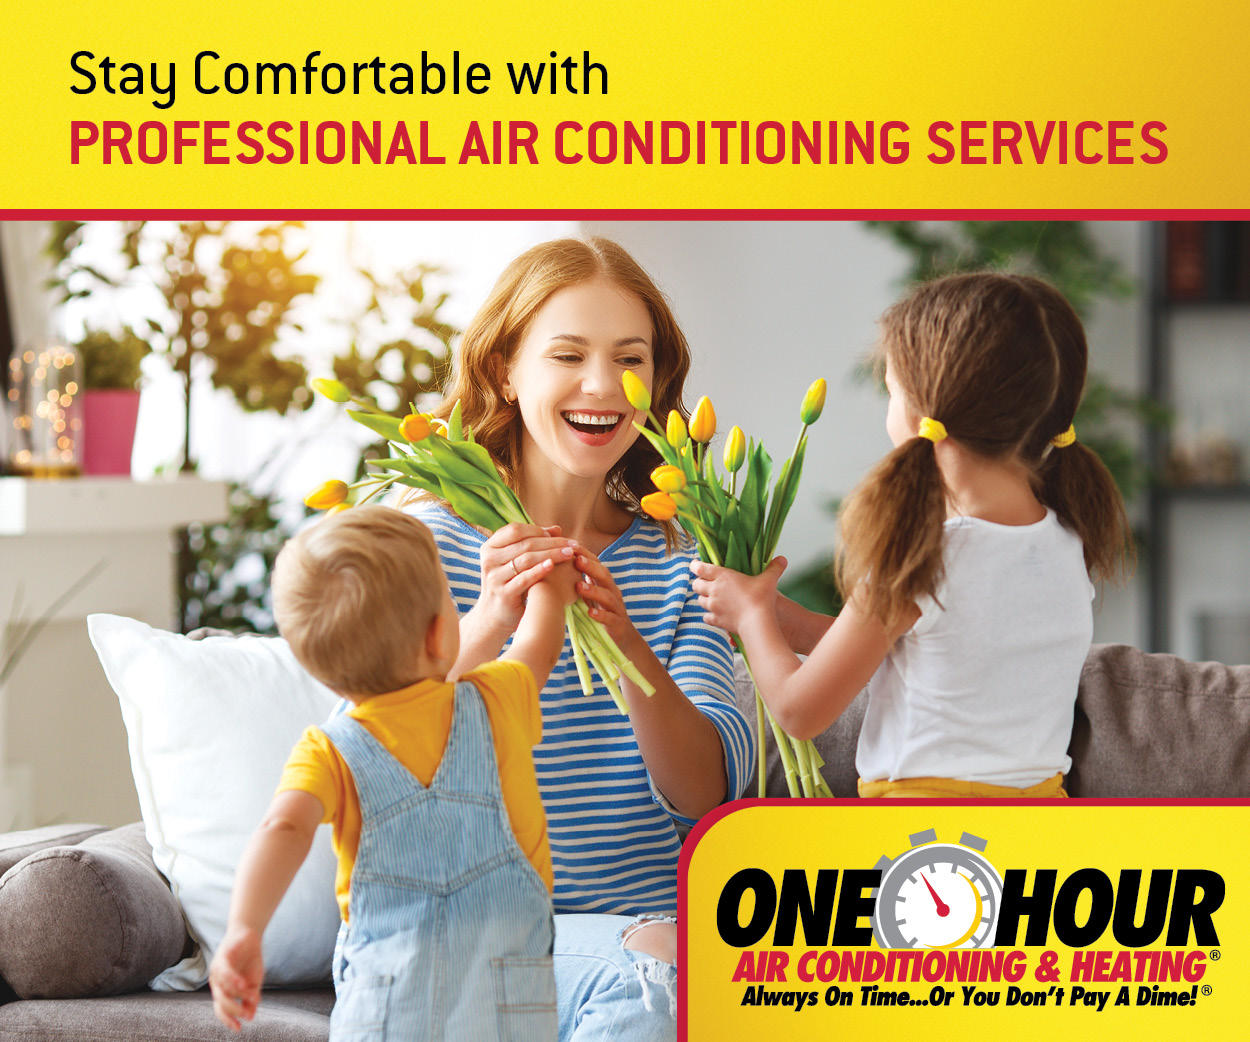 Scott's One Hour Air Conditioning & Heating Photo